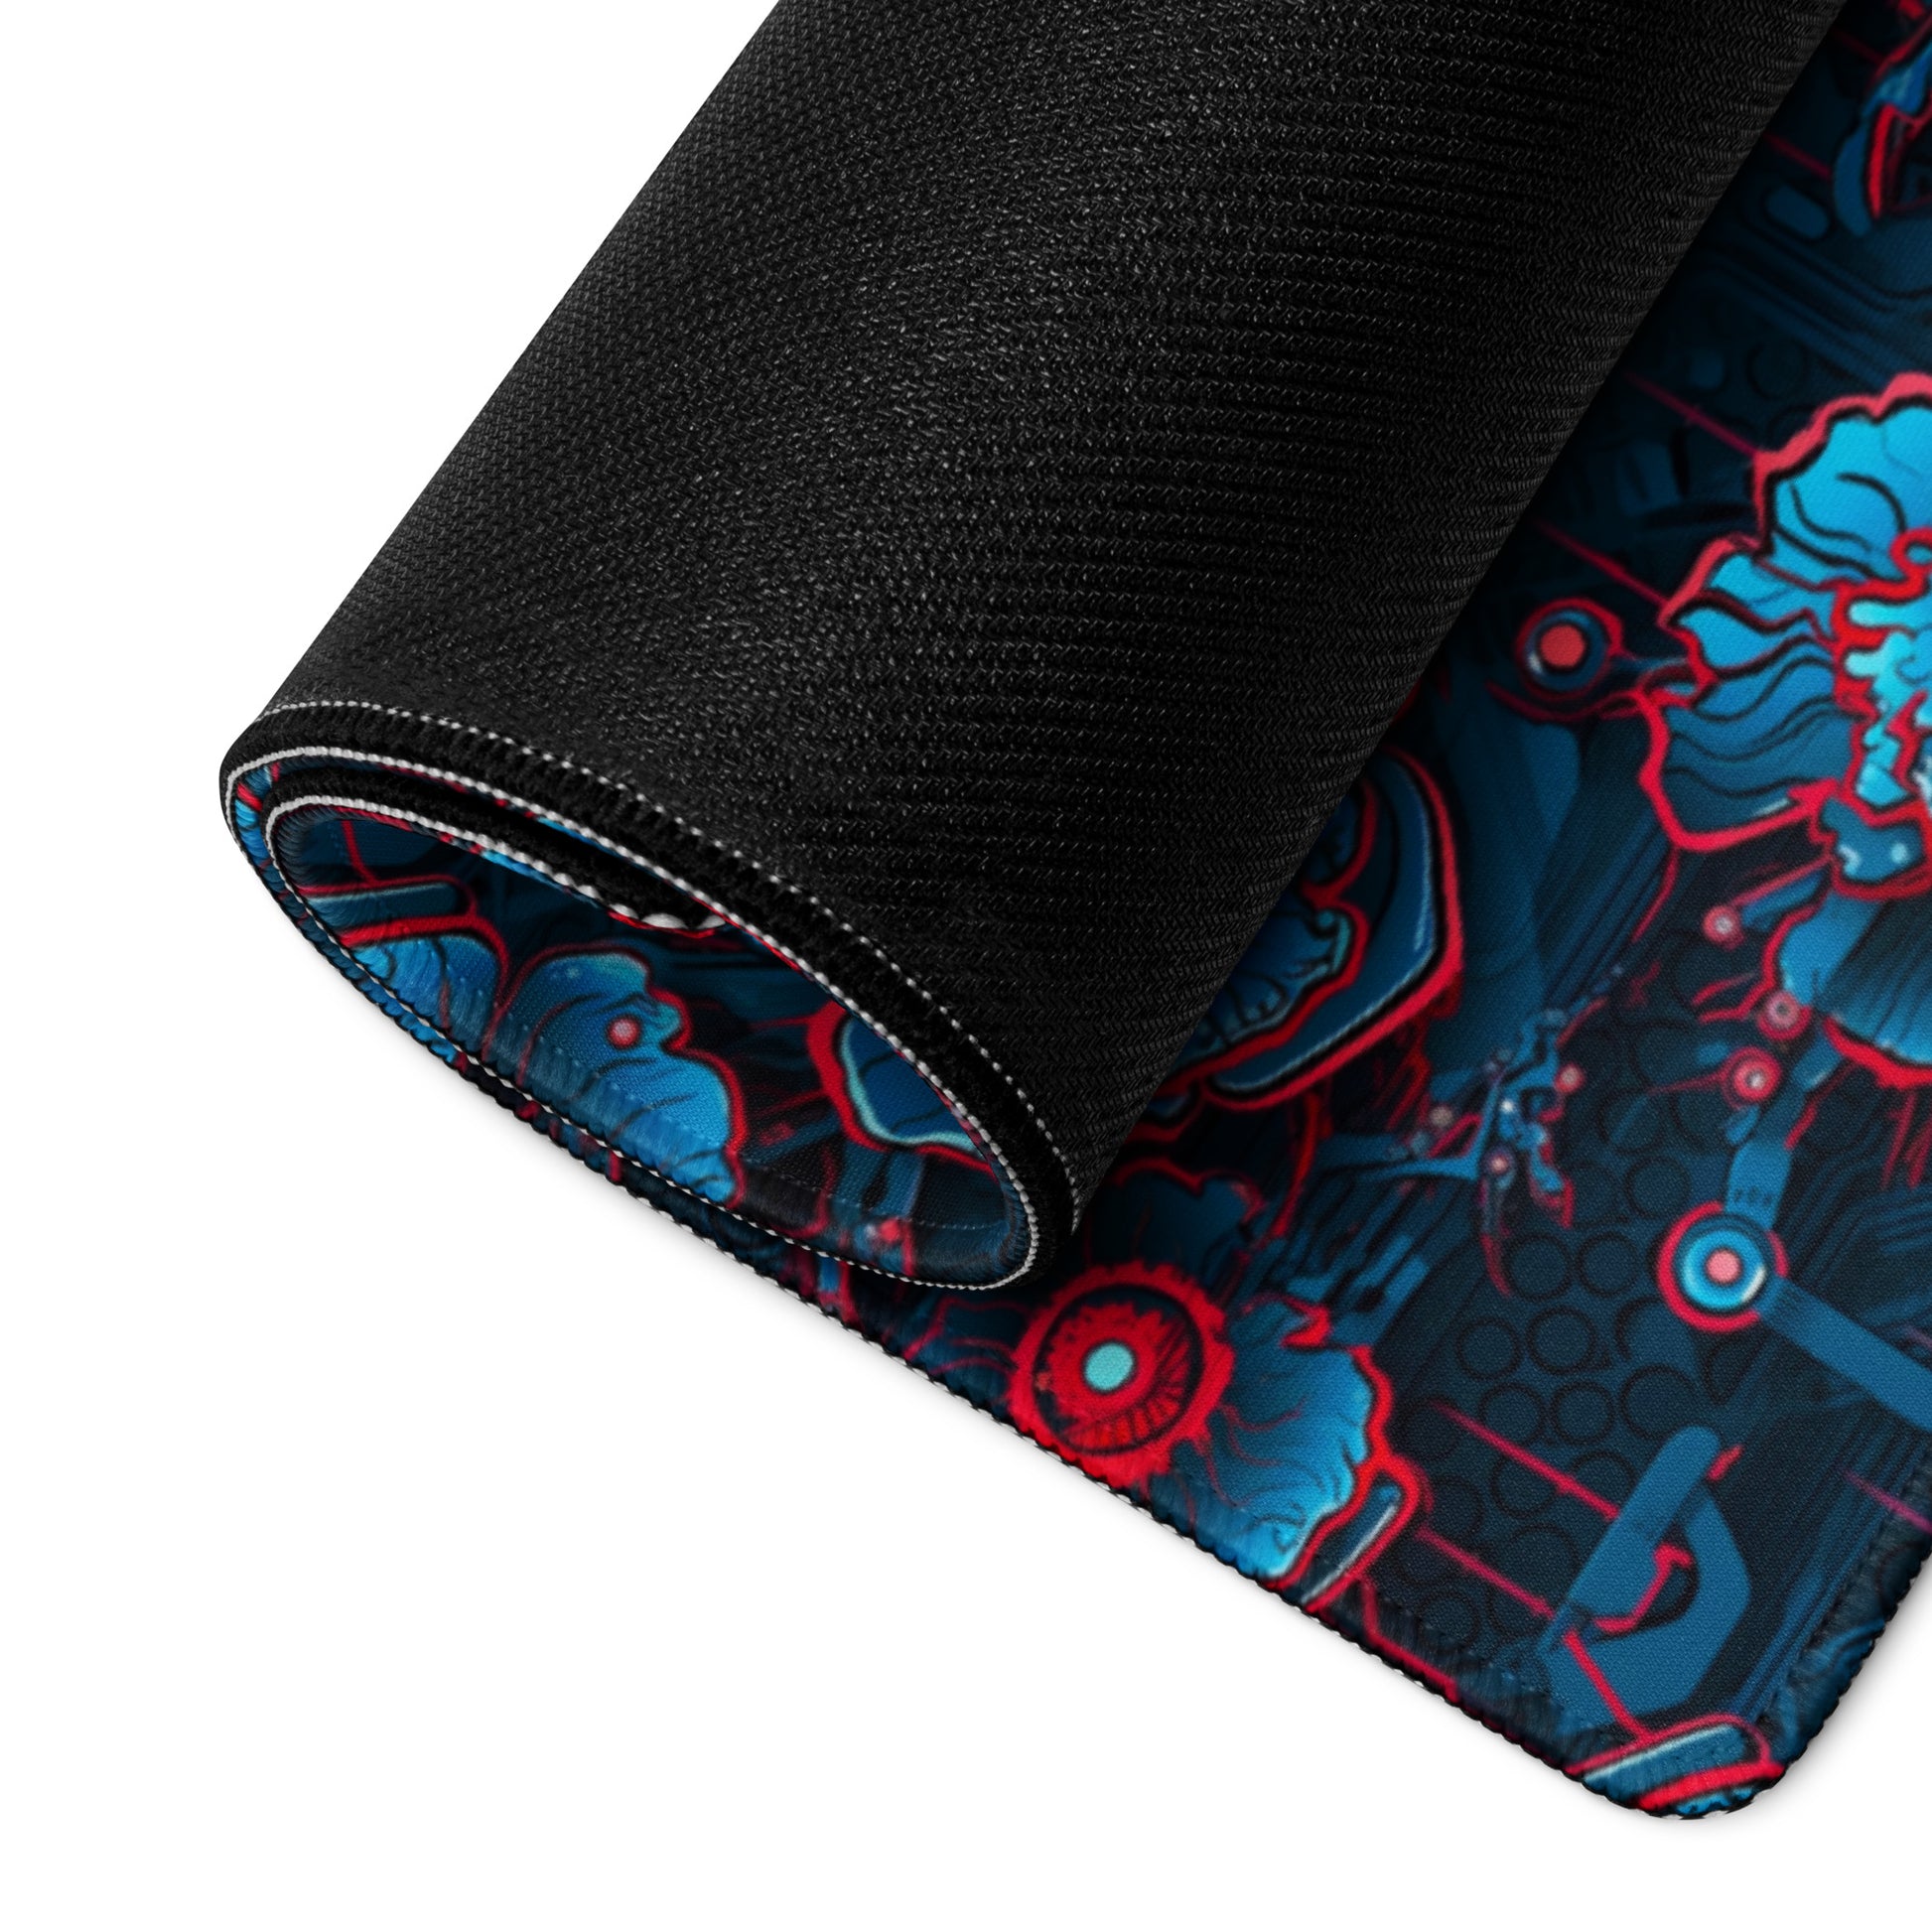 A 36" x 18" desk pad with a blue and red robotic floral pattern rolled up.